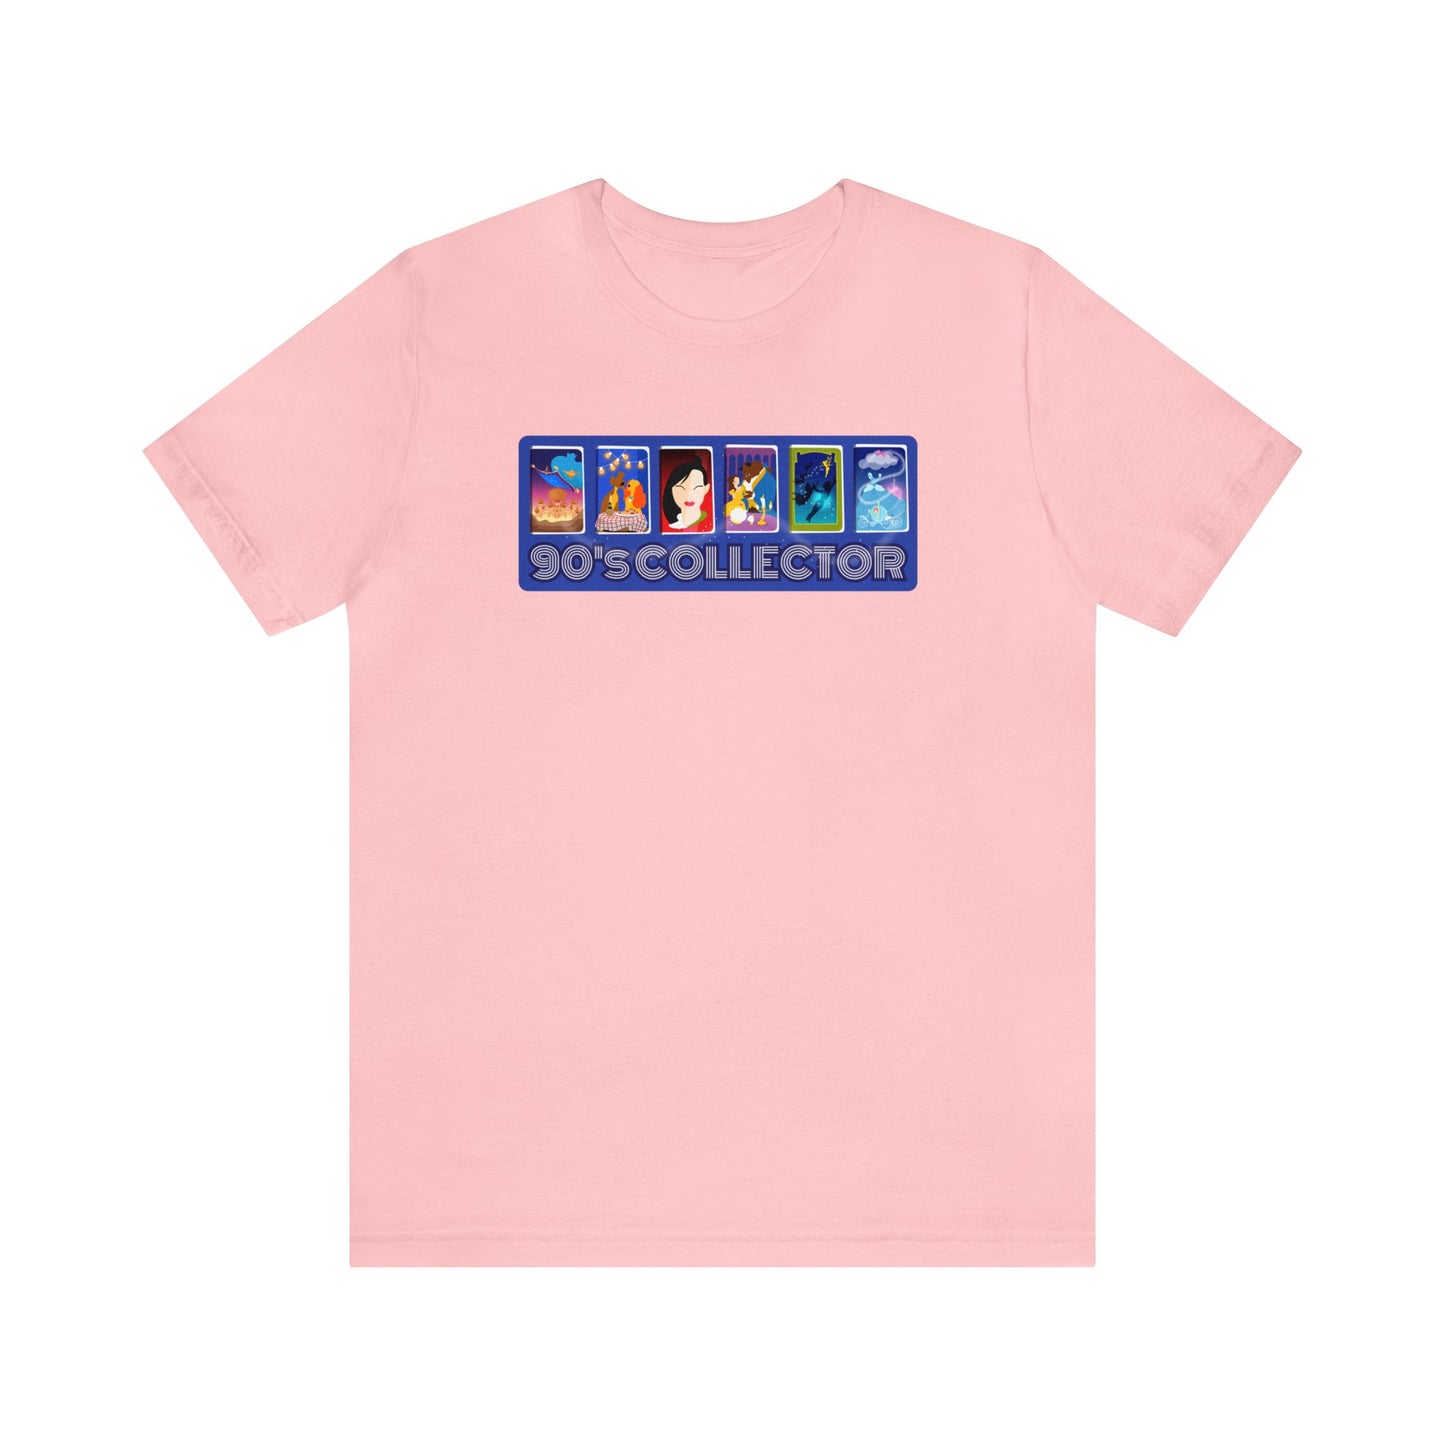 90's Collector Unisex Graphic Tee